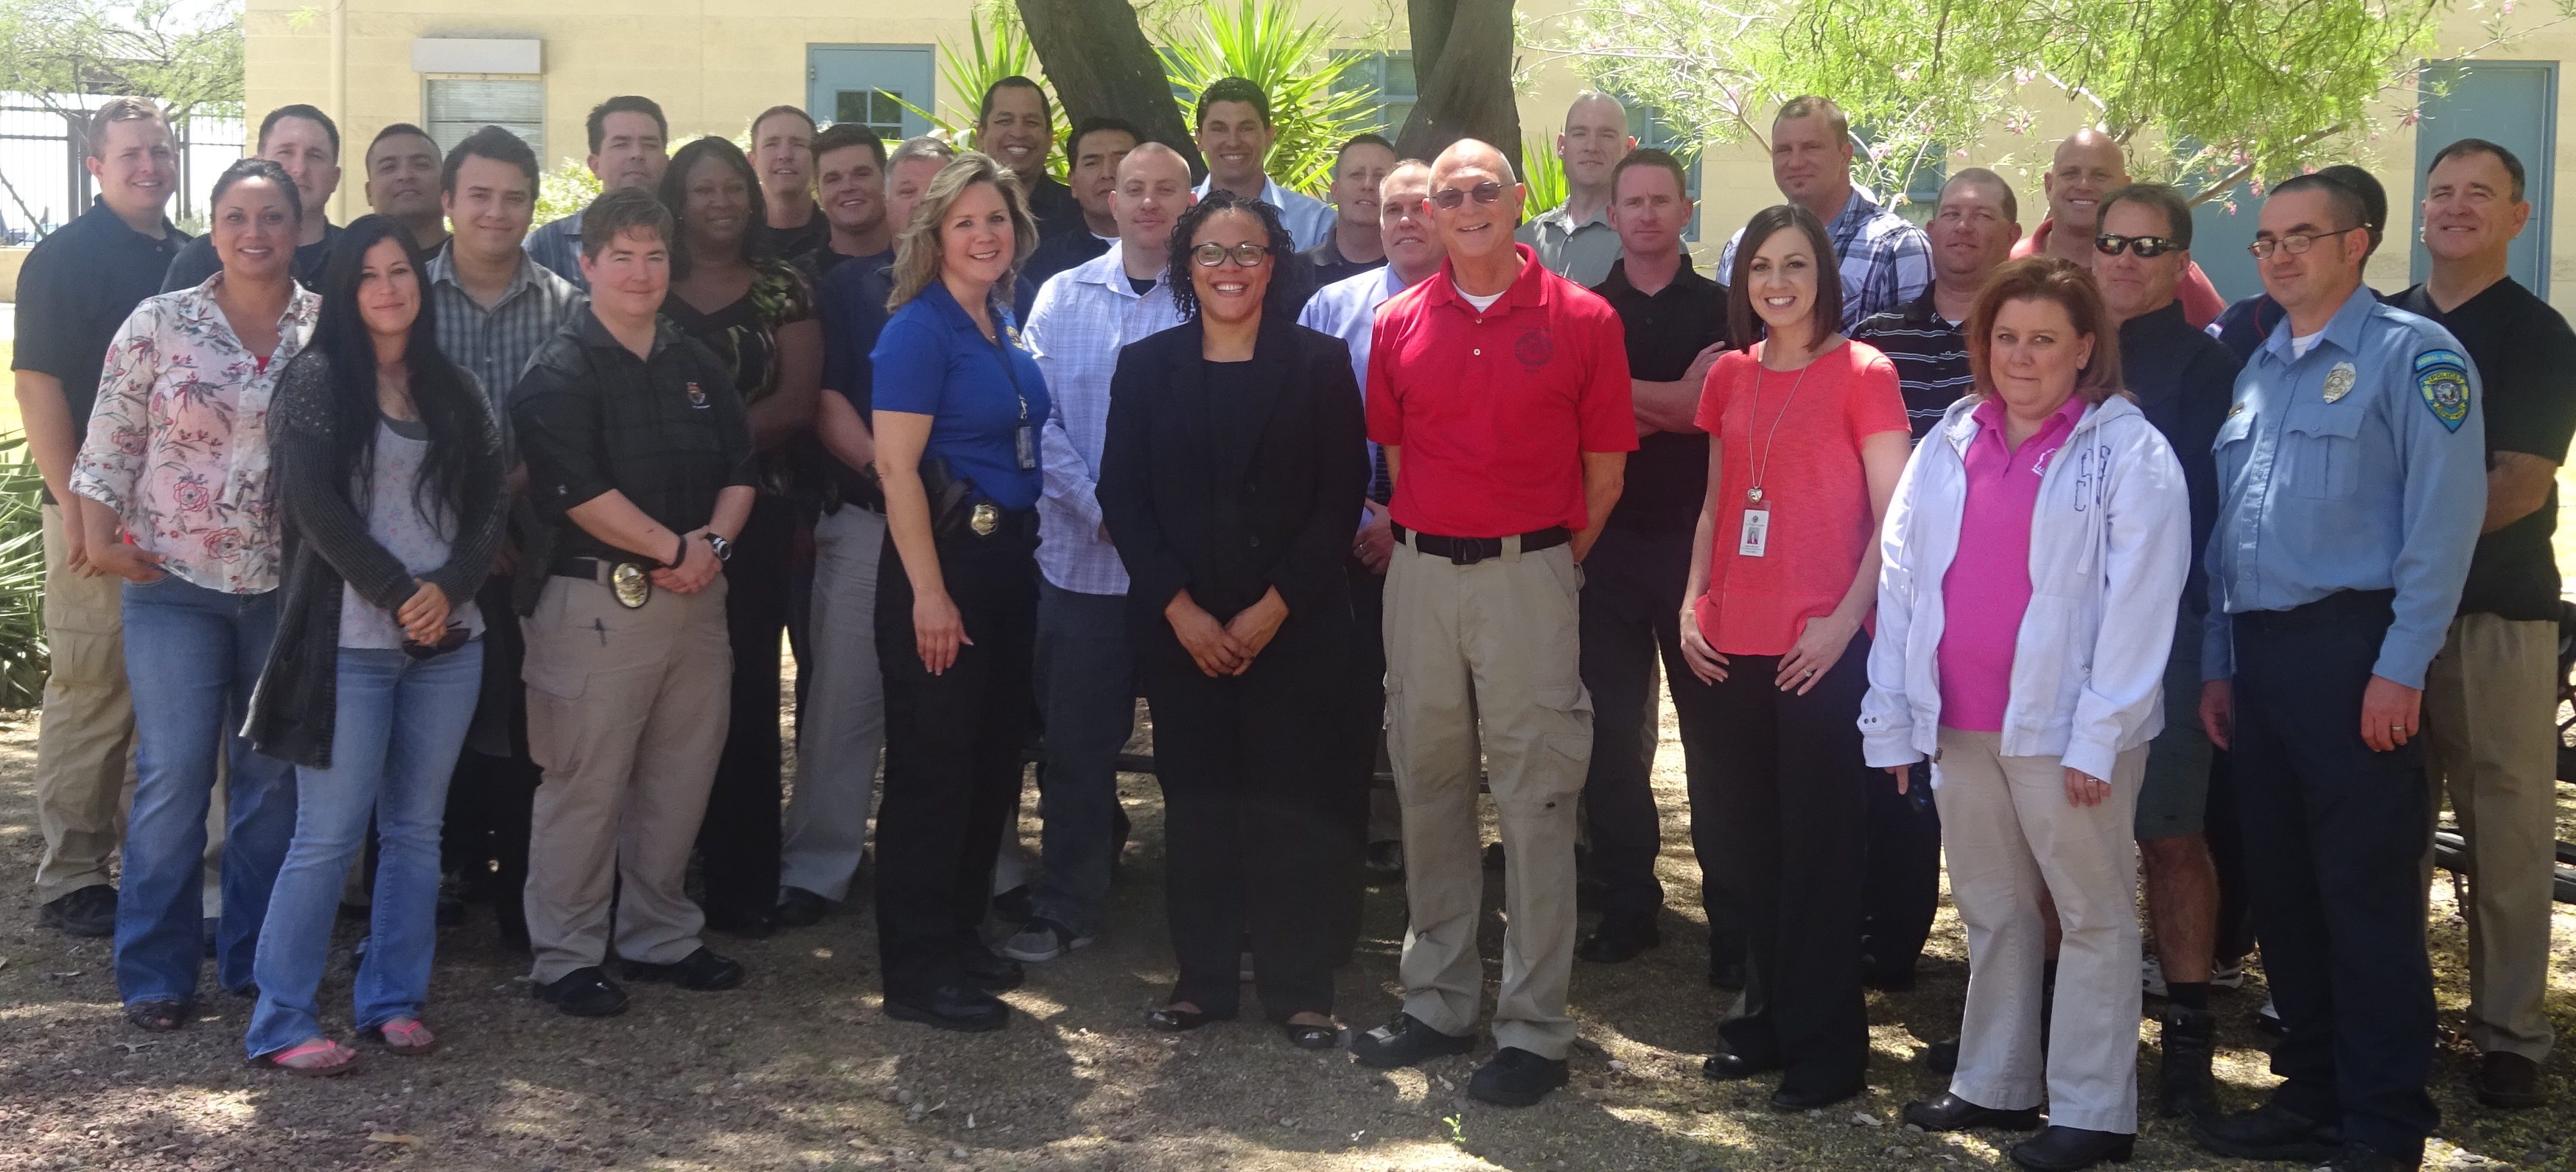 From left to right, Officer Rebecca Skillern (center, blue shirt), Nicola Smith-Kea of the CSG Justice Center, and Senior Officer Frank Webb stand with the Apache Junction CIT class.